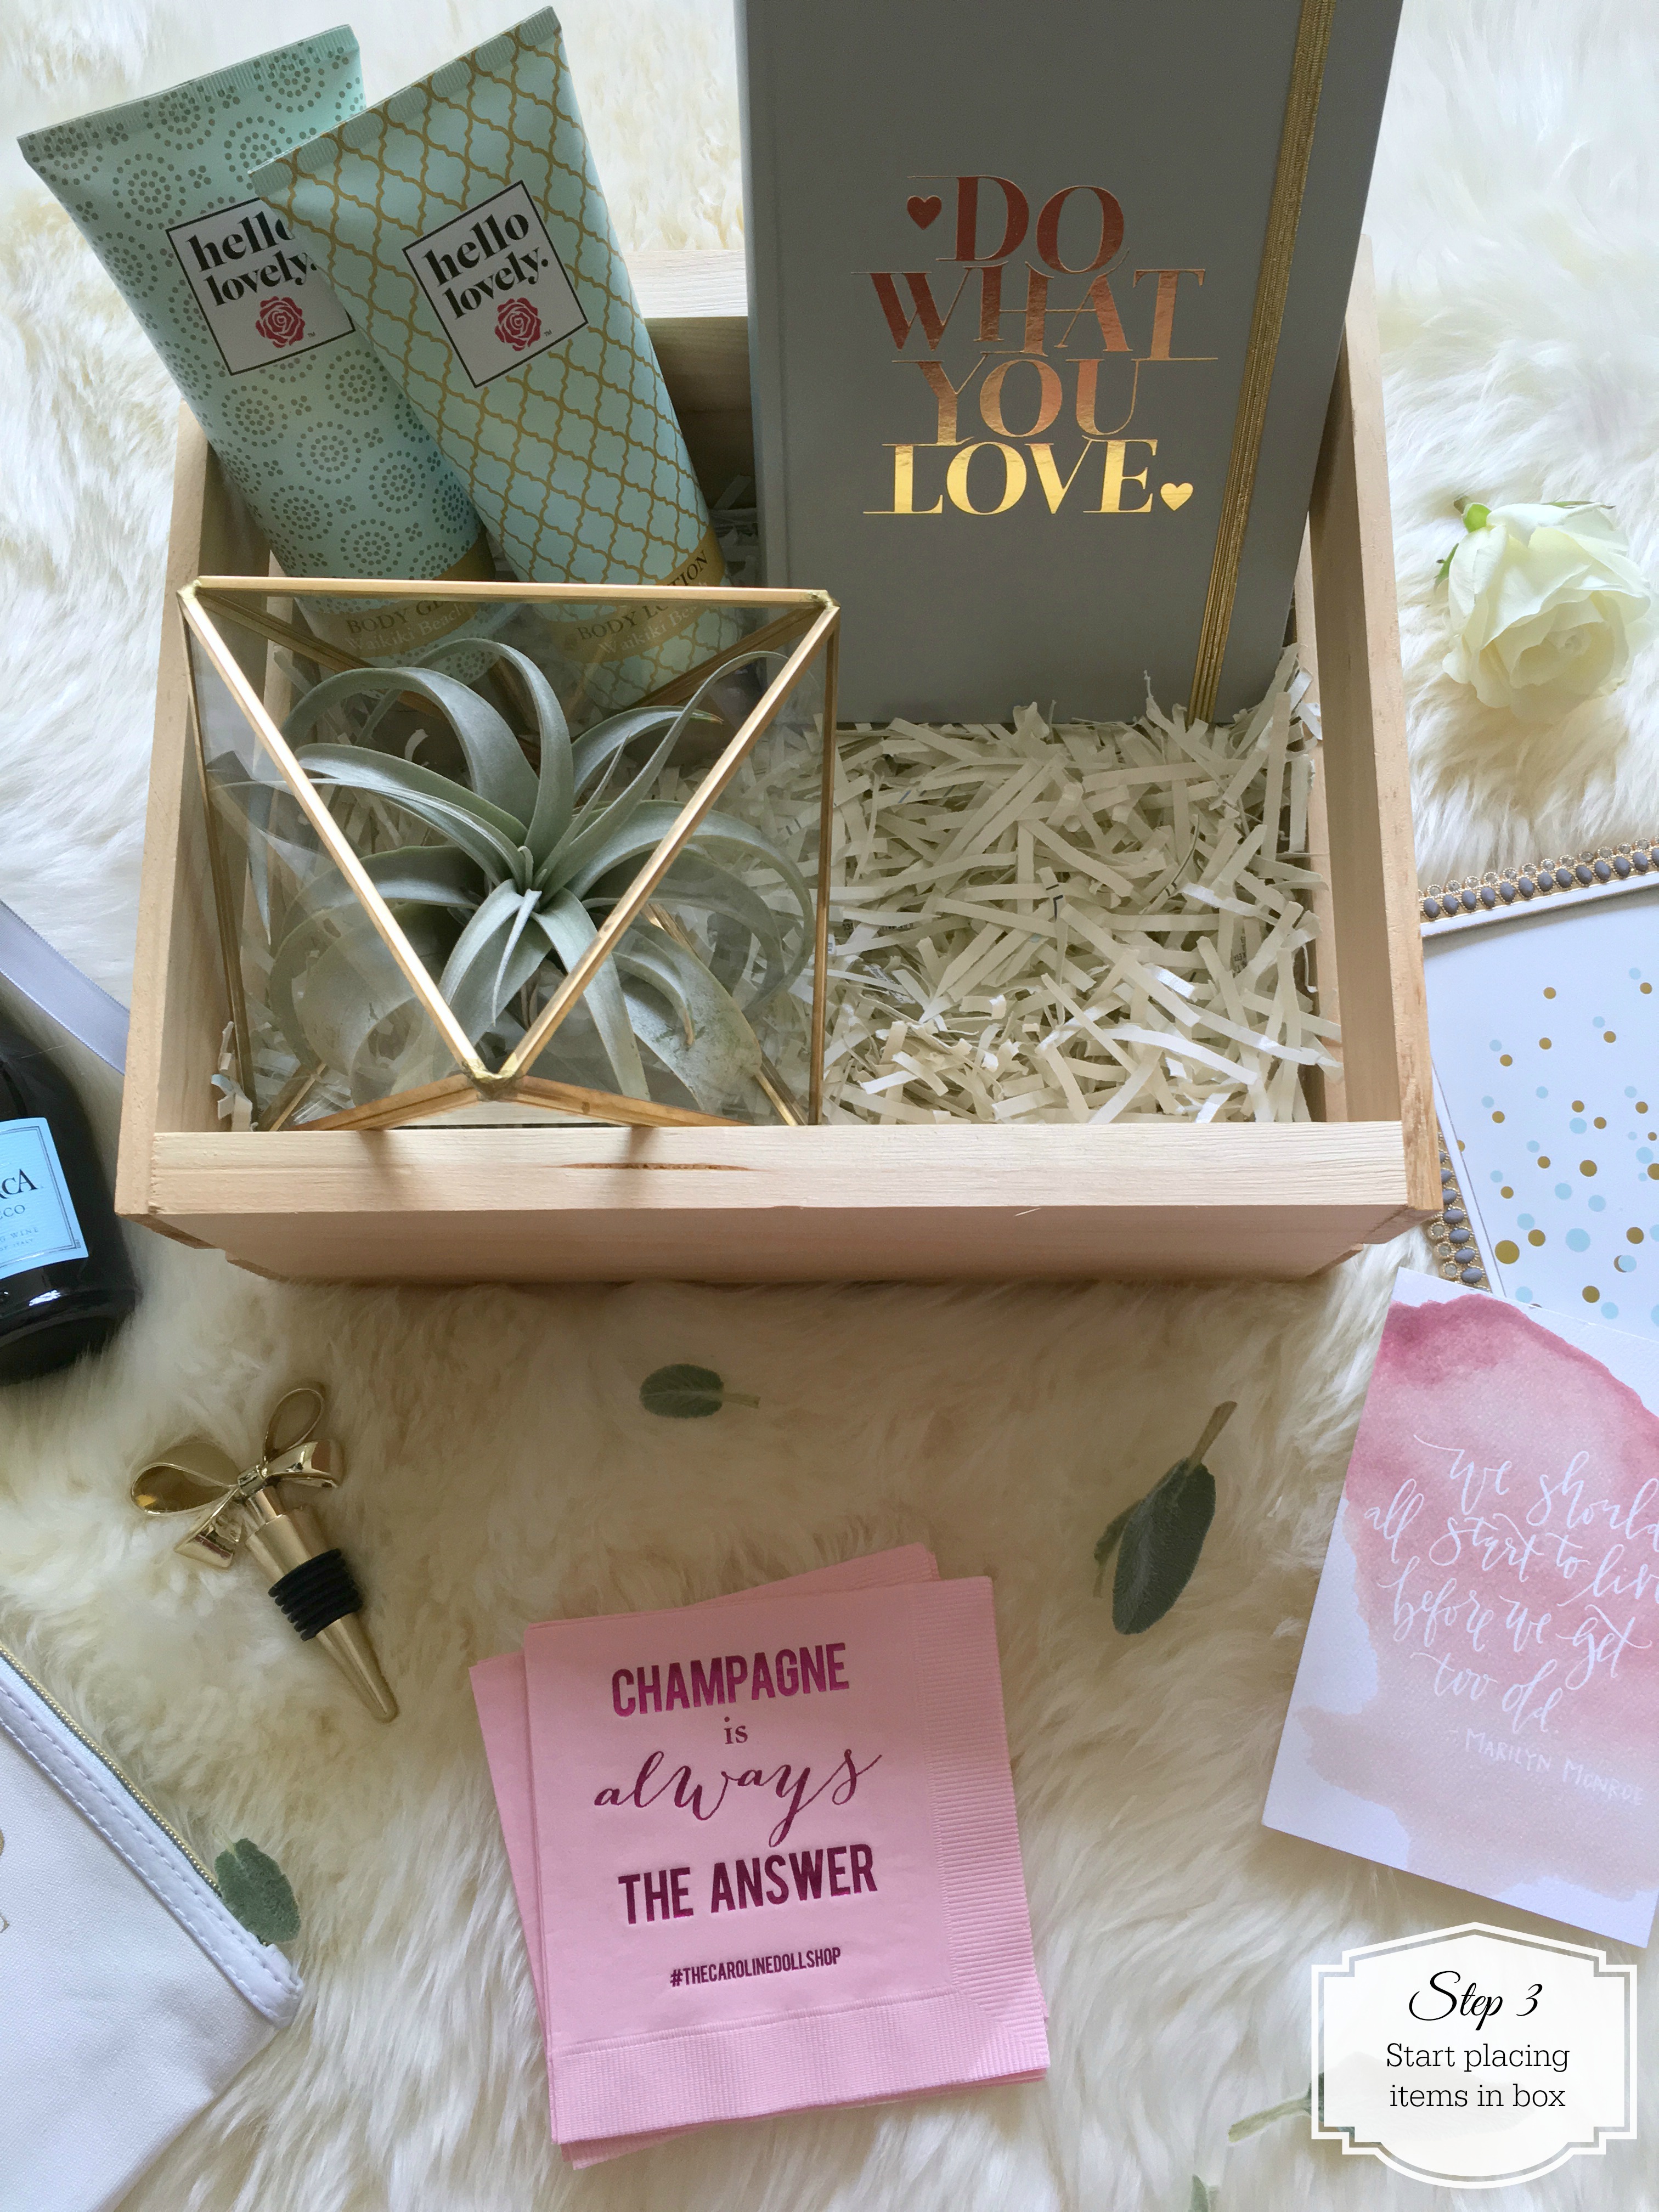 JS Weddings and Events Grand Rapids Wedding Planner and Floral Designer - DIY Bridesmaid Gift Box